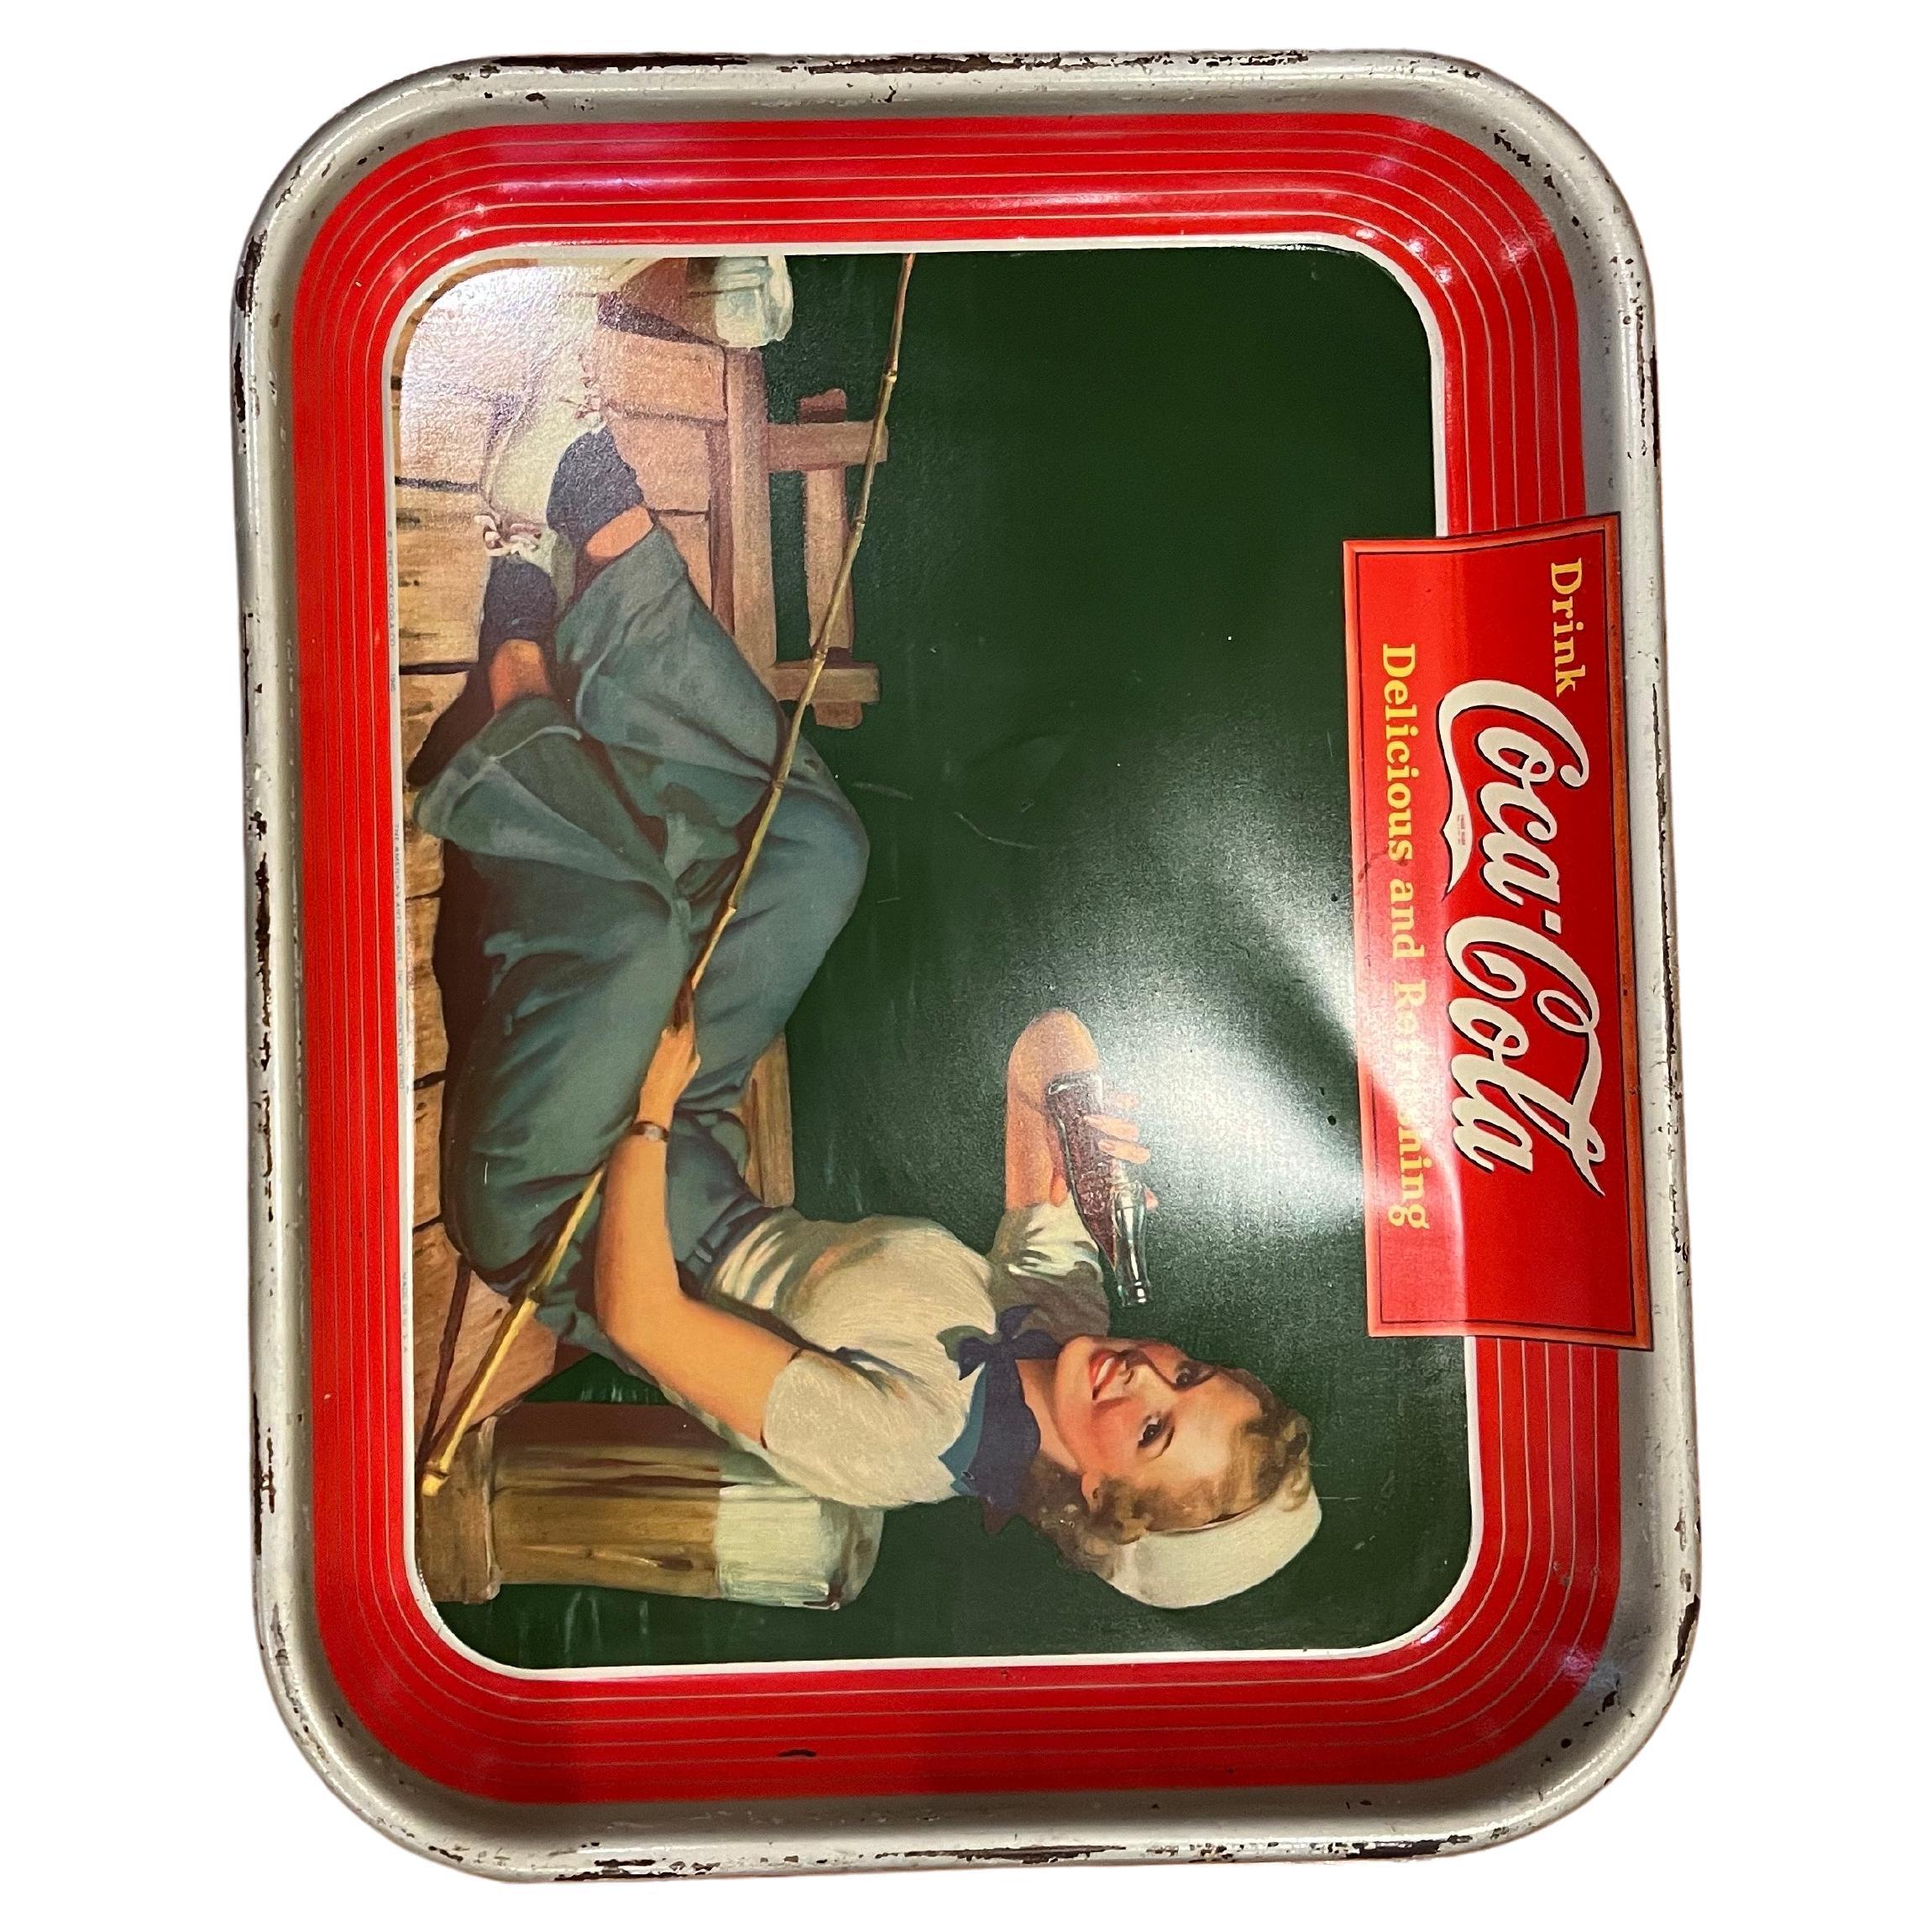 American Original Coke Coca Cola 1940's Advertising Serving Tray 321-K In Good Condition For Sale In San Diego, CA